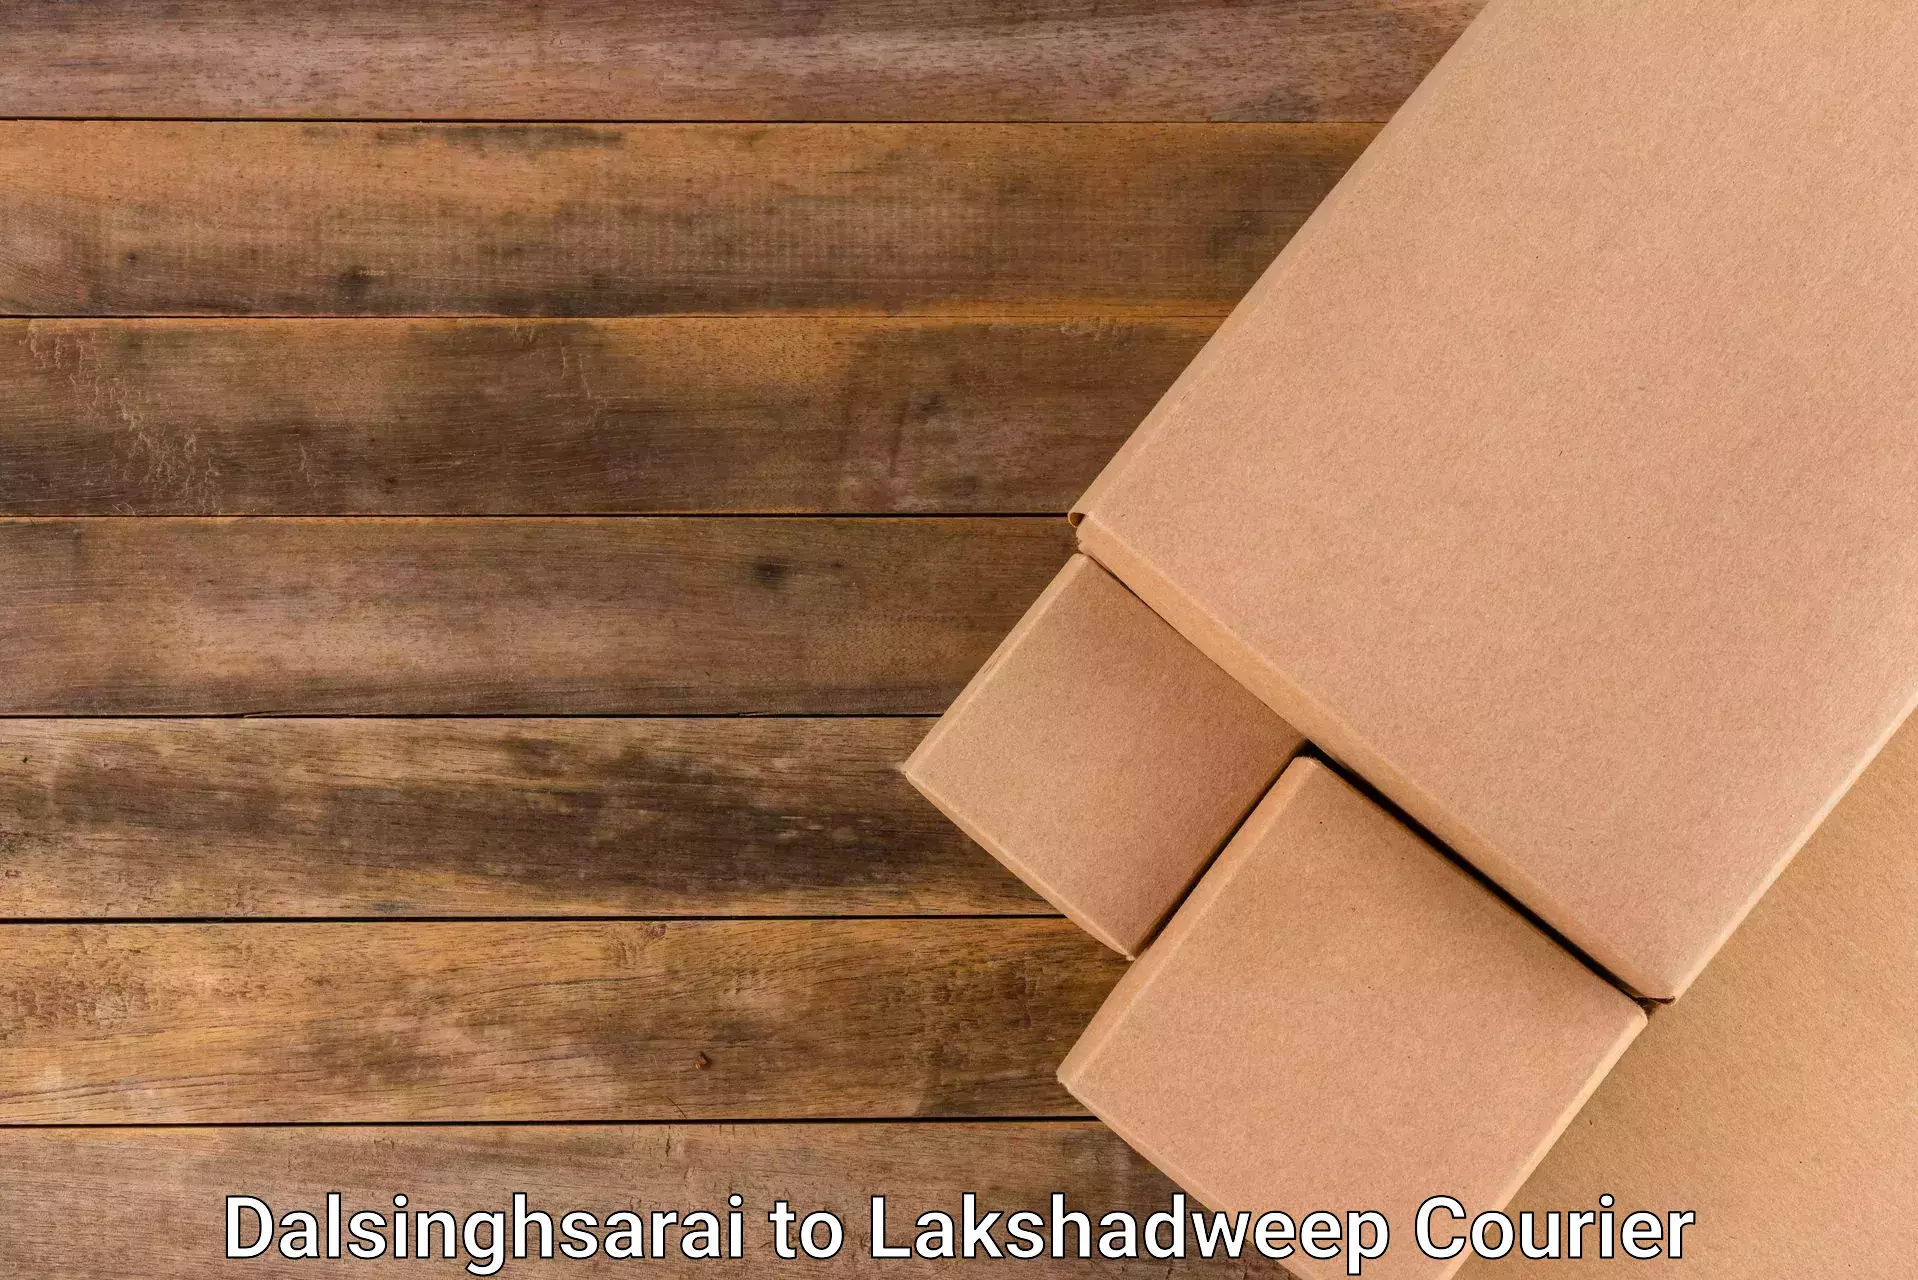 On-call courier service Dalsinghsarai to Lakshadweep